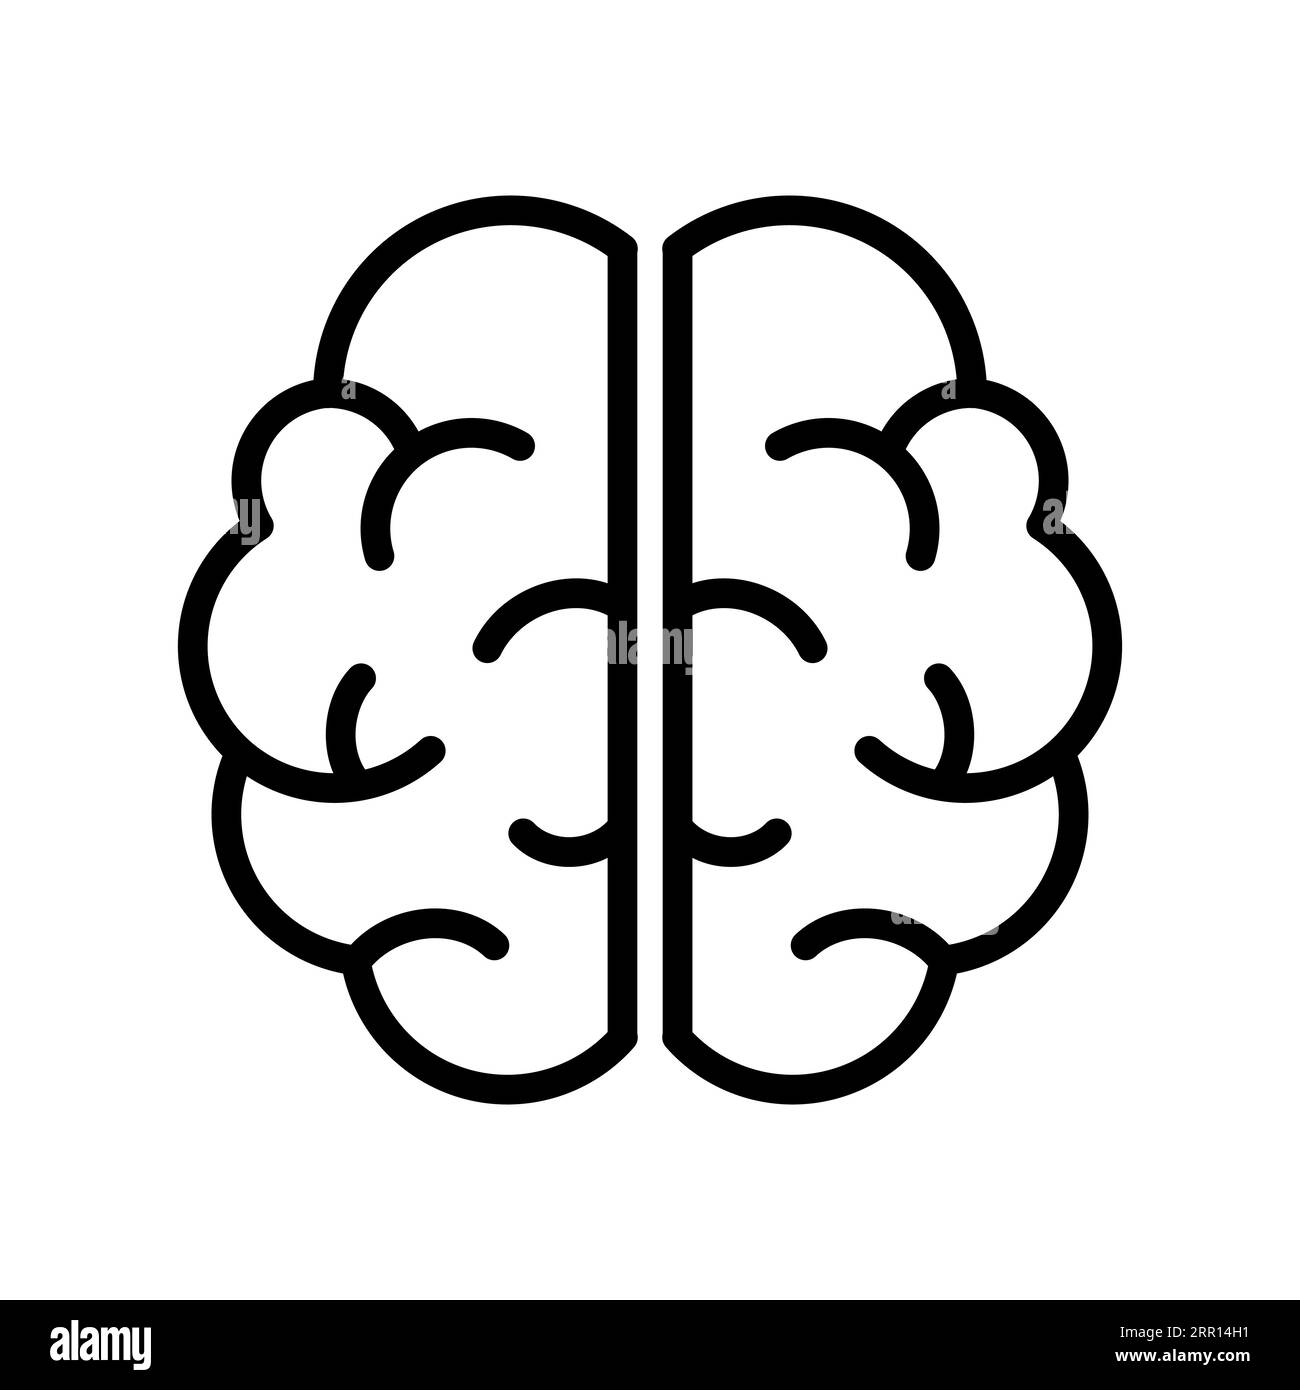 Brain top view line icon. Two hemispheres of the brain. Left and right side of cortex. Cerebrum outline symbol. Human mind sign. Creative thinking Stock Vector